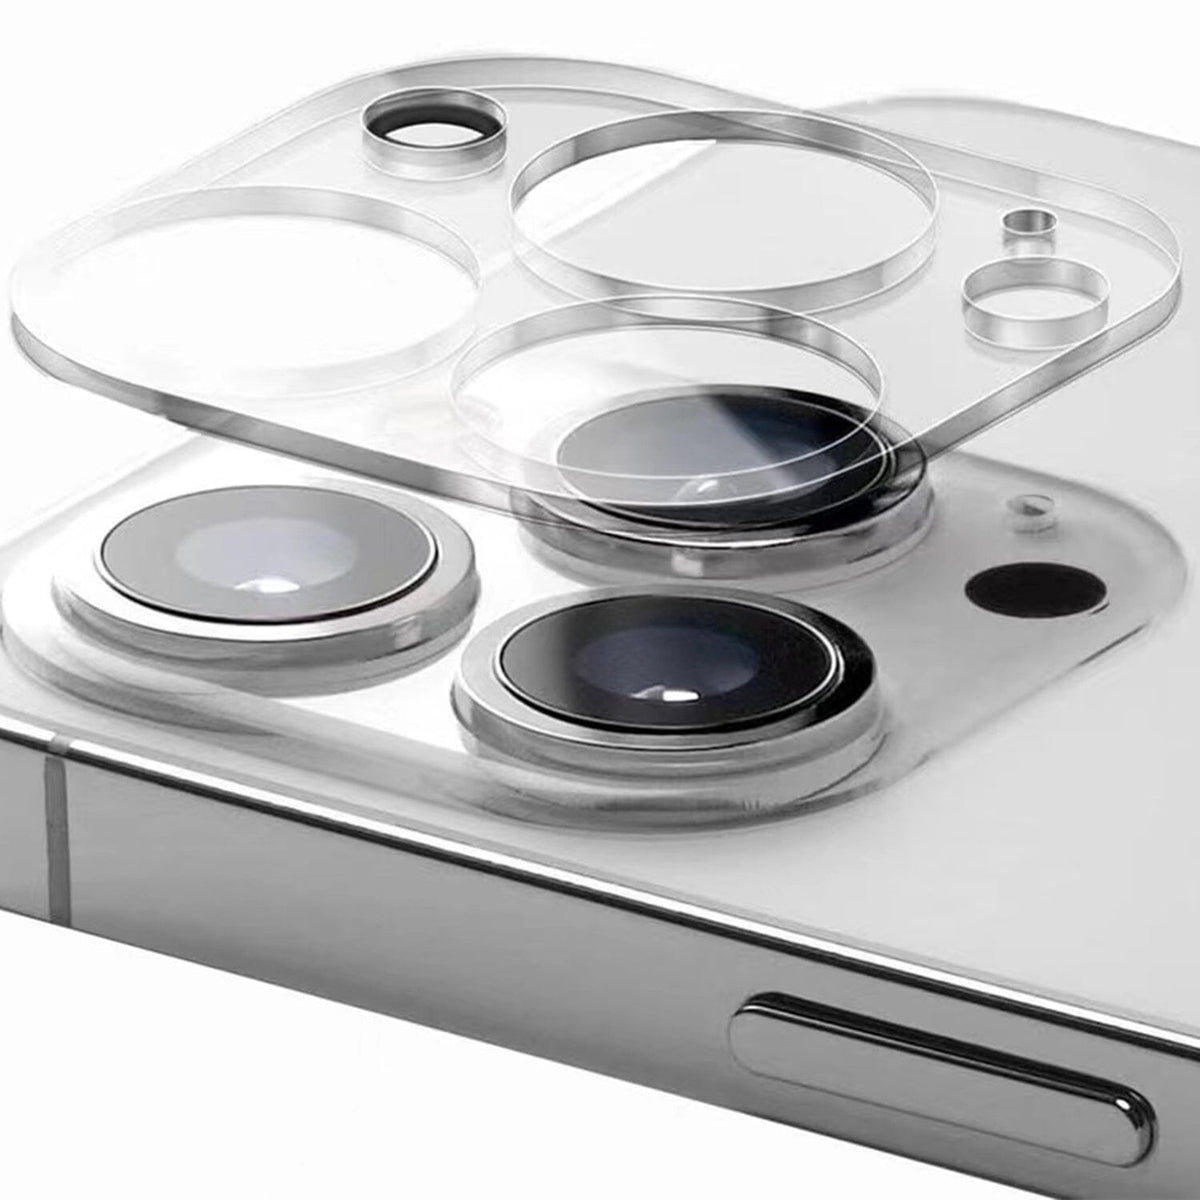 iPhone 15 Pro Camera Lens Protector